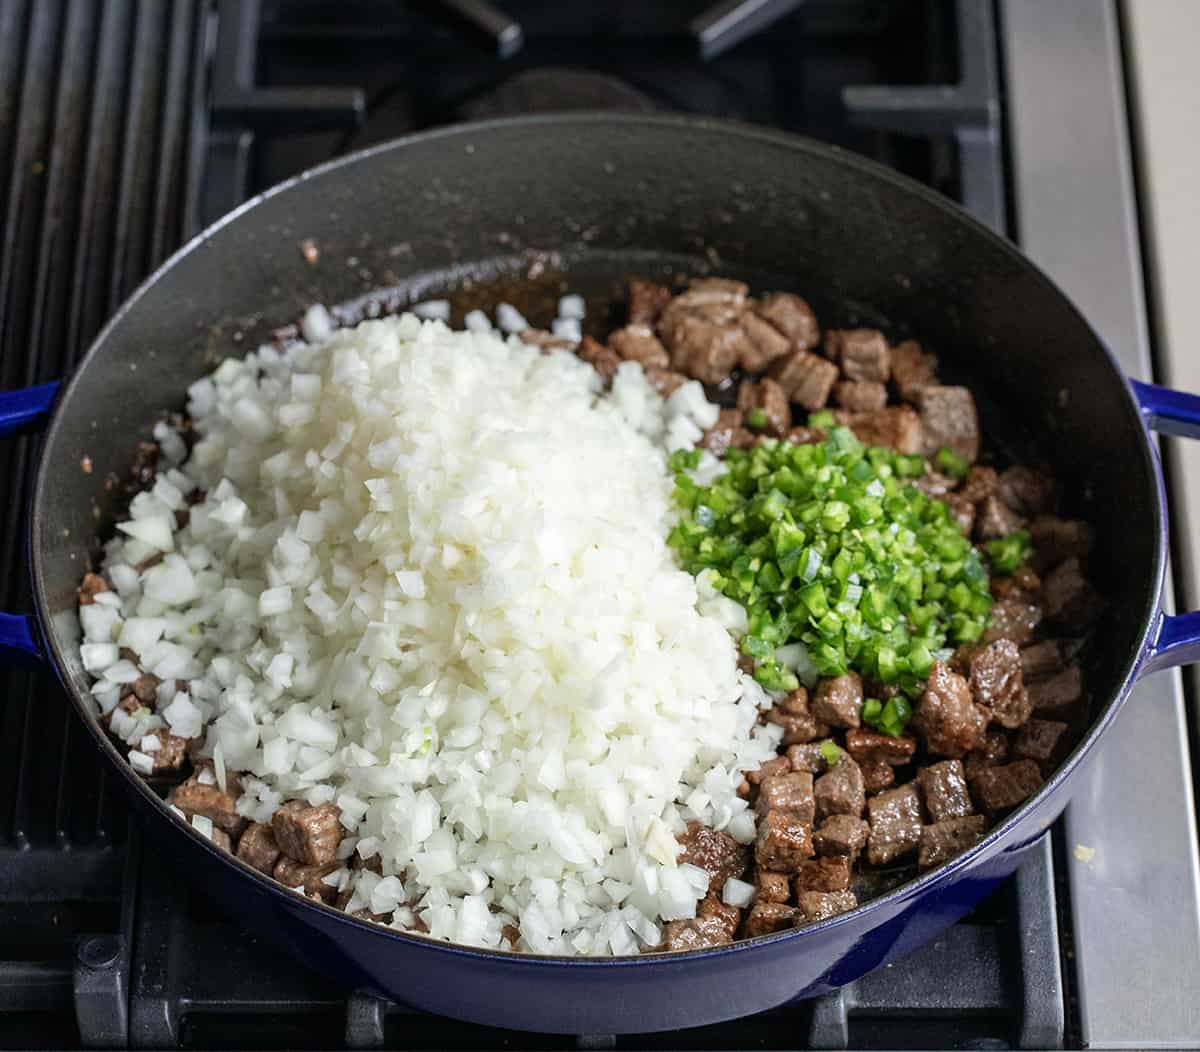 Ingredients for Spicy Steak Chili in a pan on the stovetop.